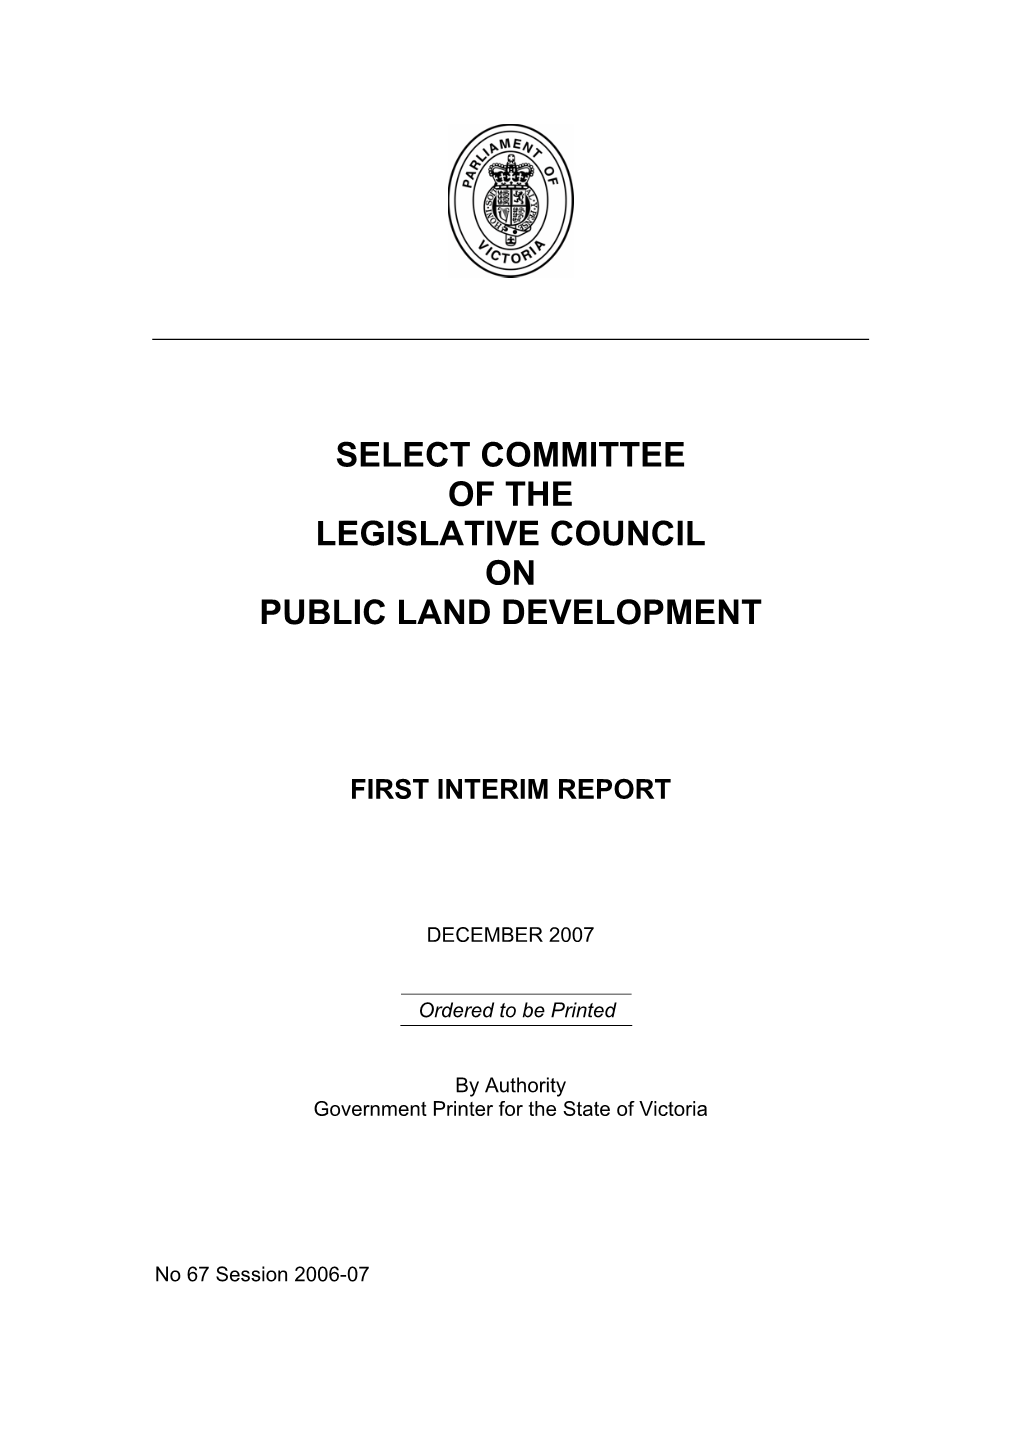 Select Committee of the Legislative Council on Public Land Development